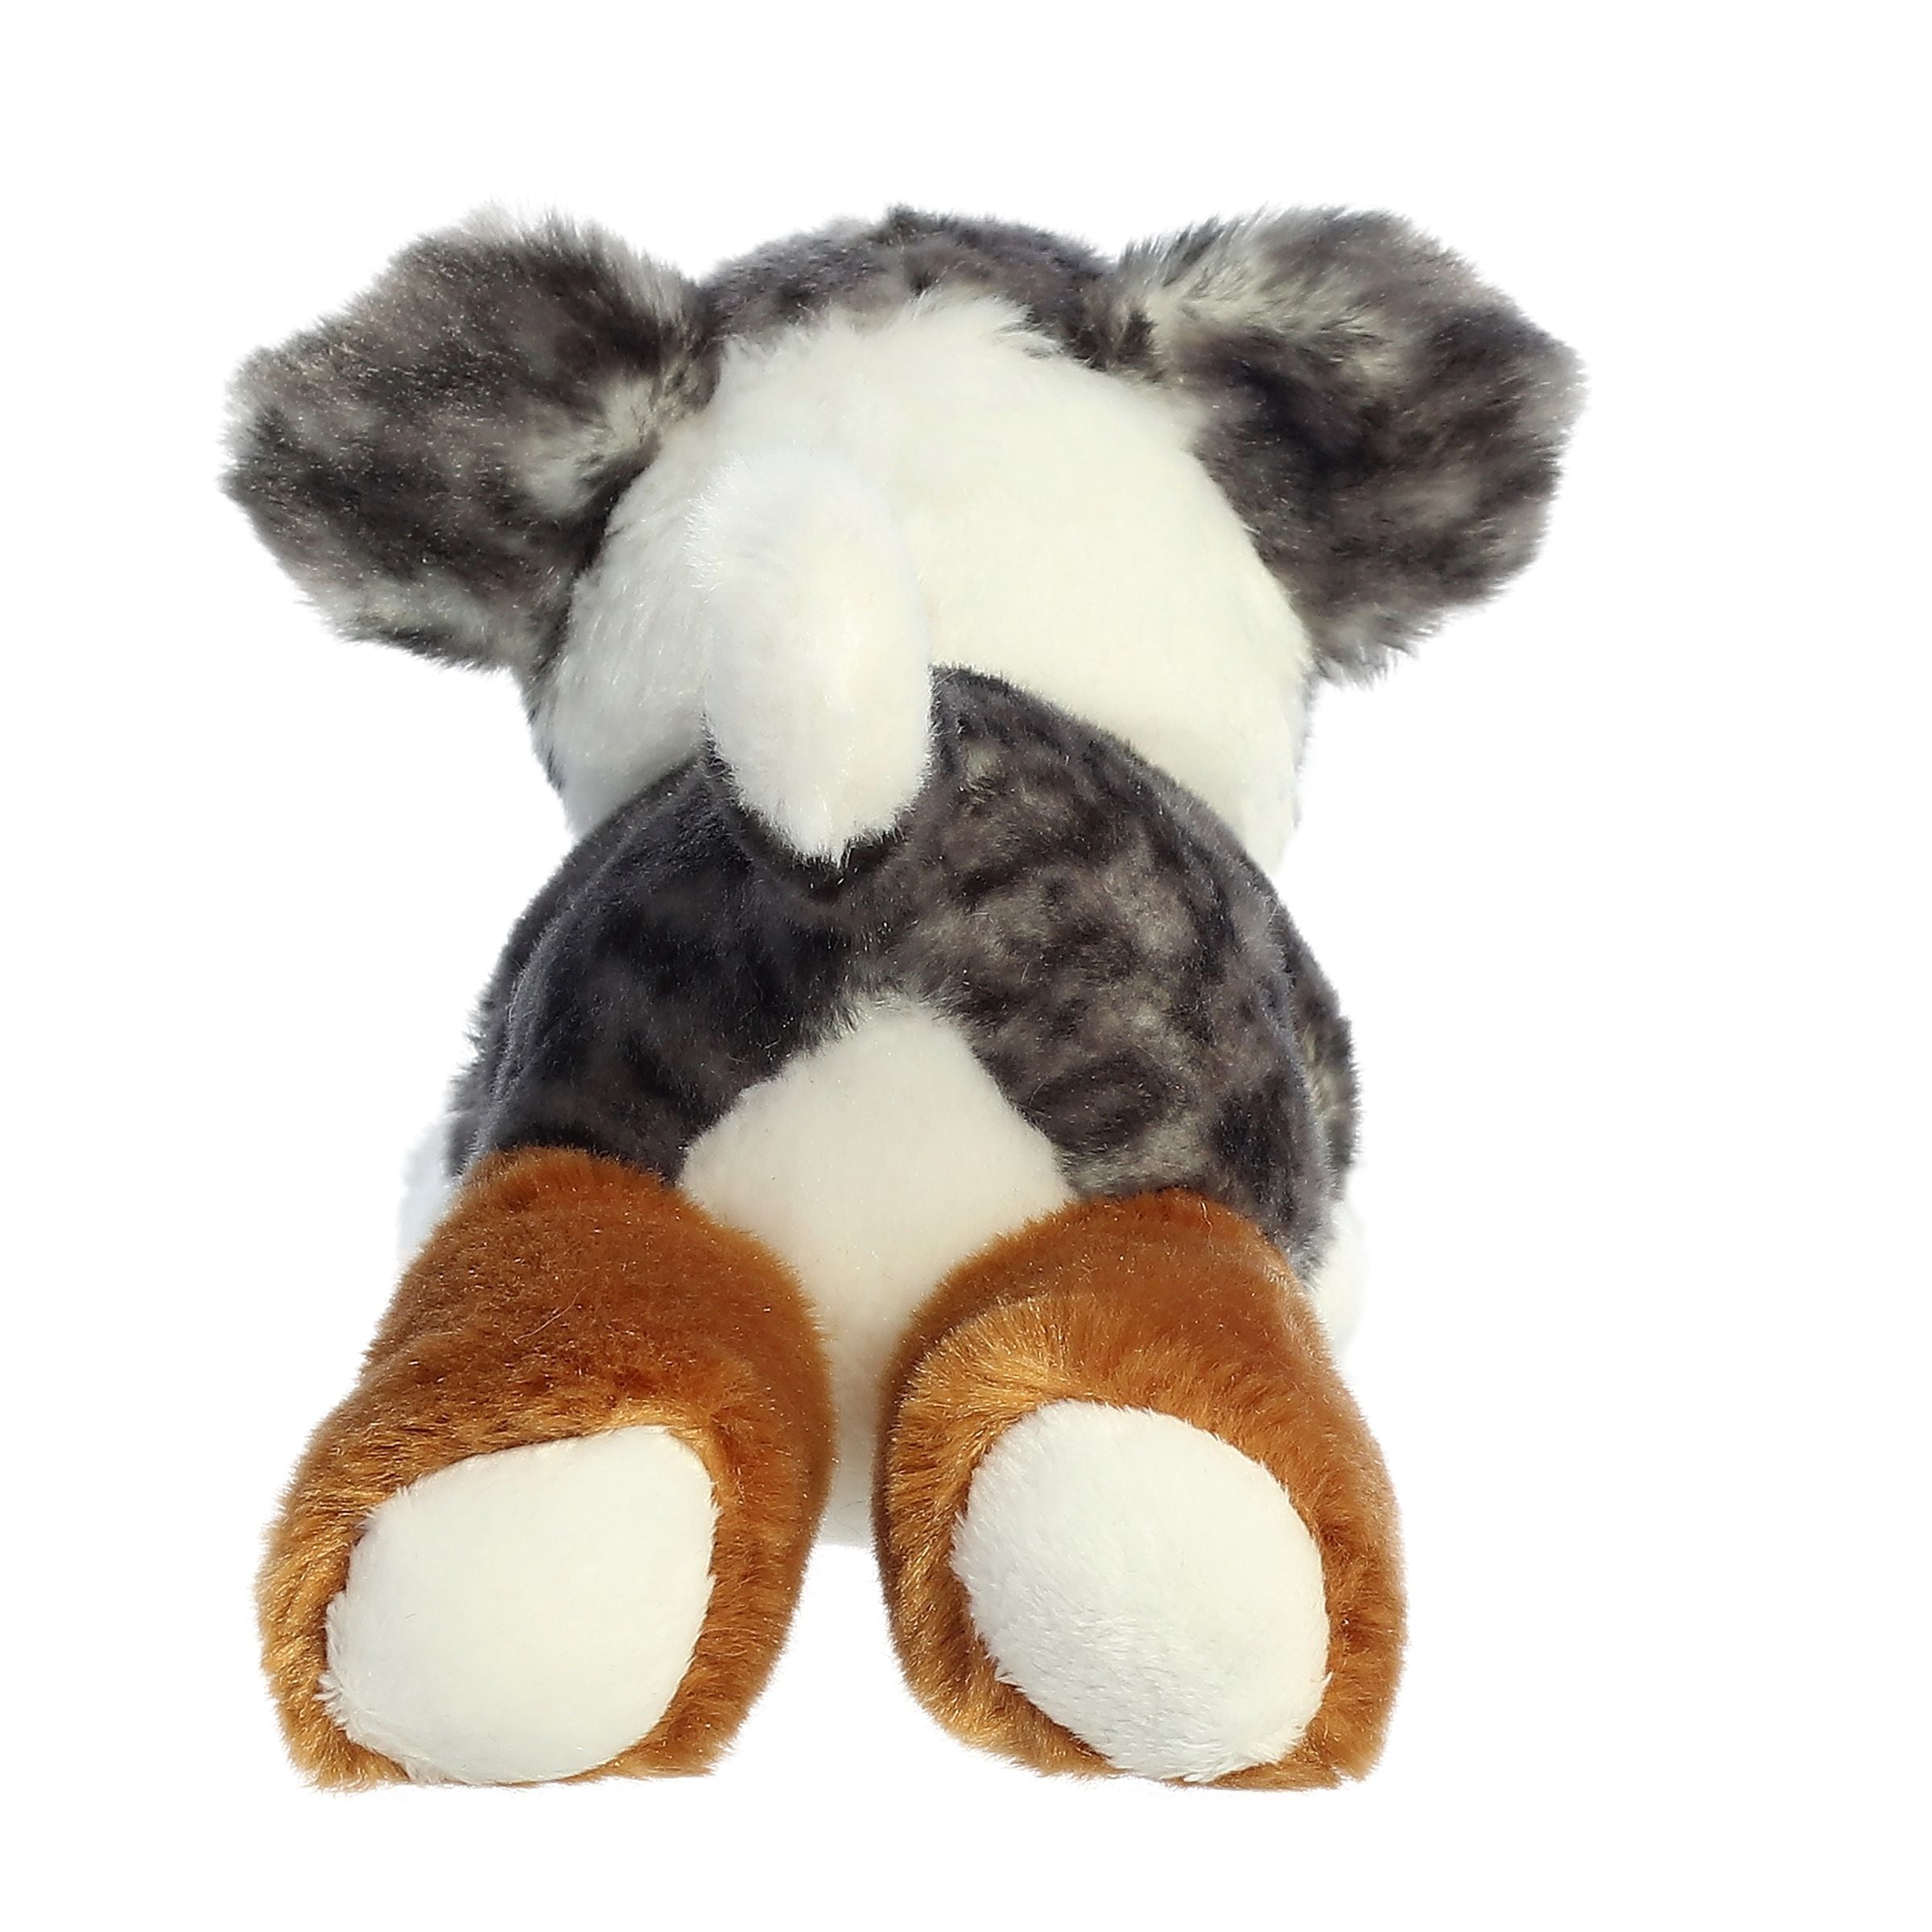 Little Clever the Stuffed Coyote Mini Flopsie by Aurora